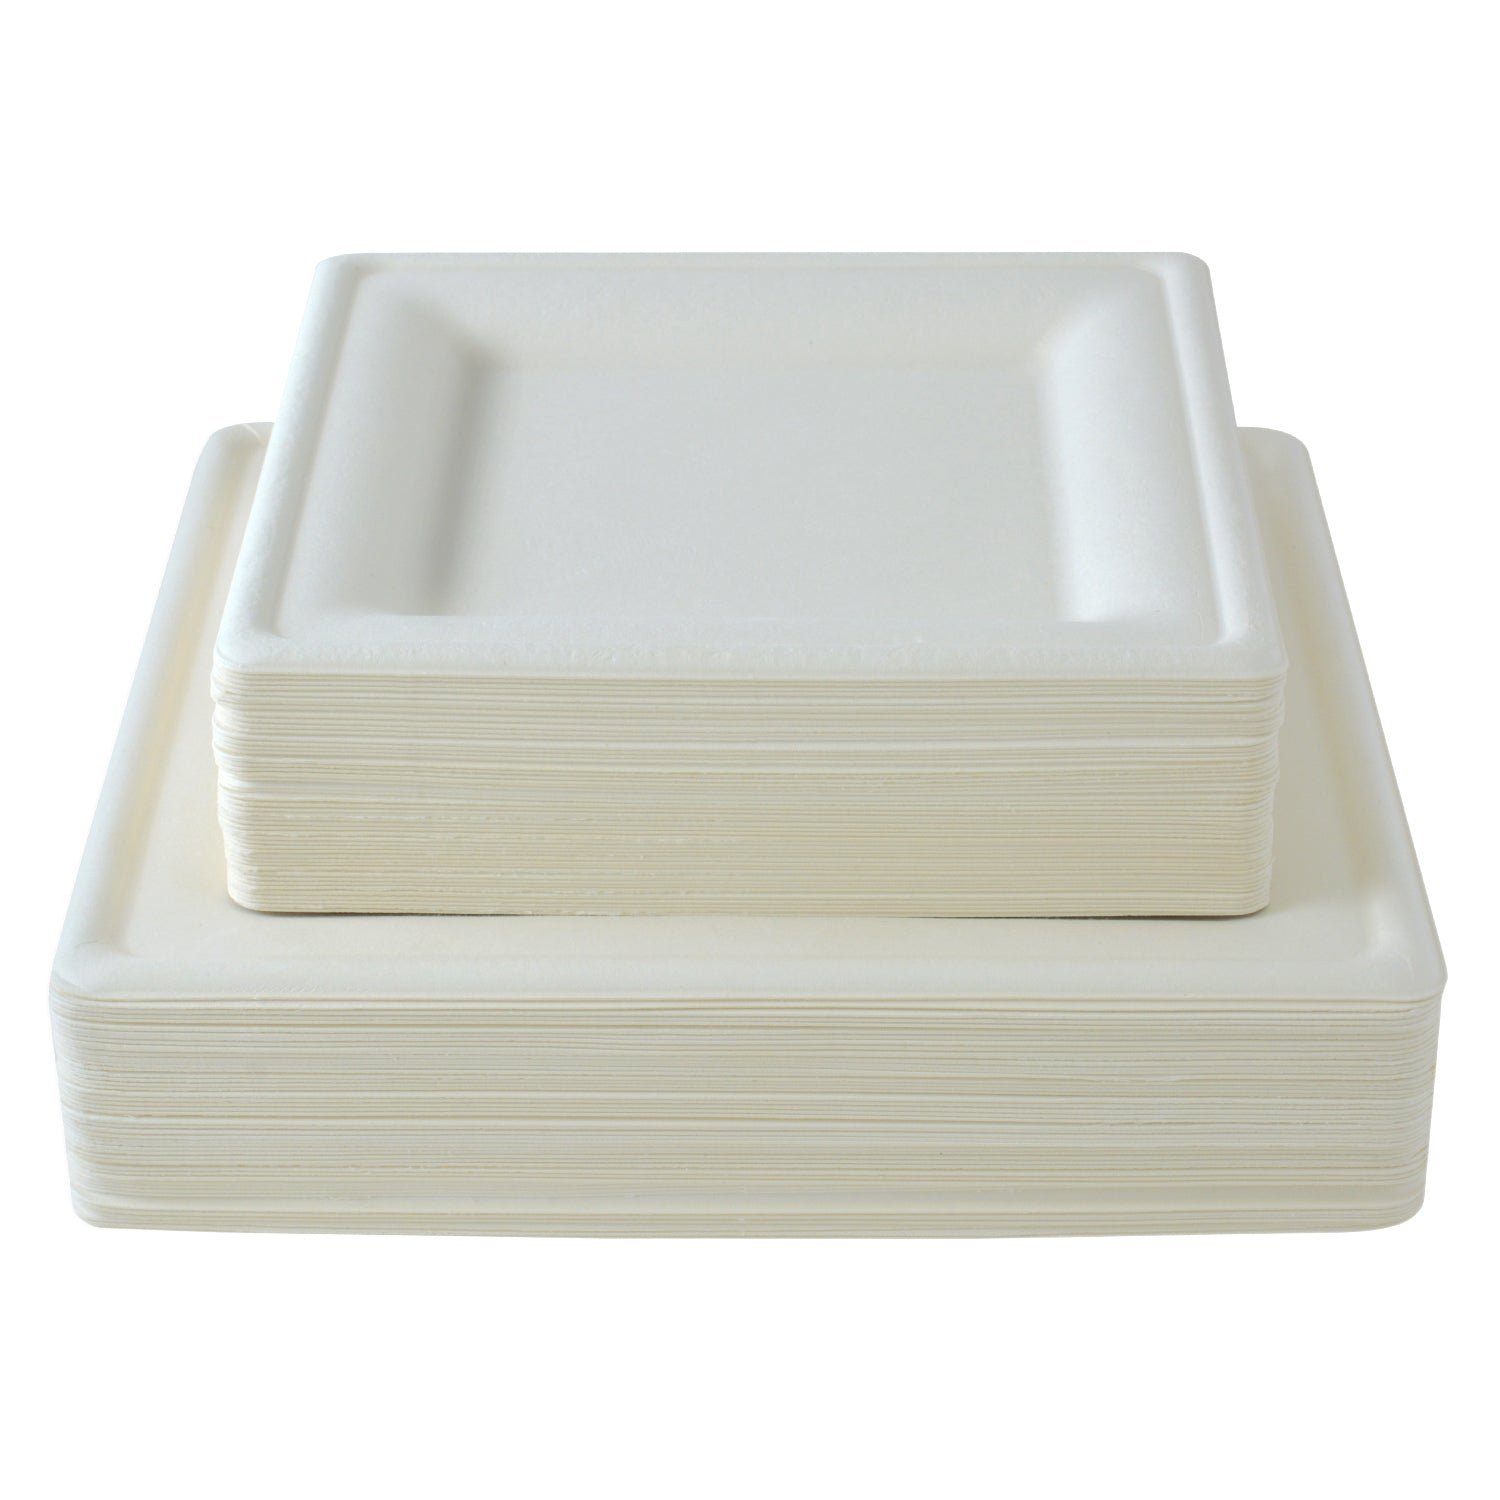 Save on Hosted Super Strong Compostable Plates 9 Inch Order Online